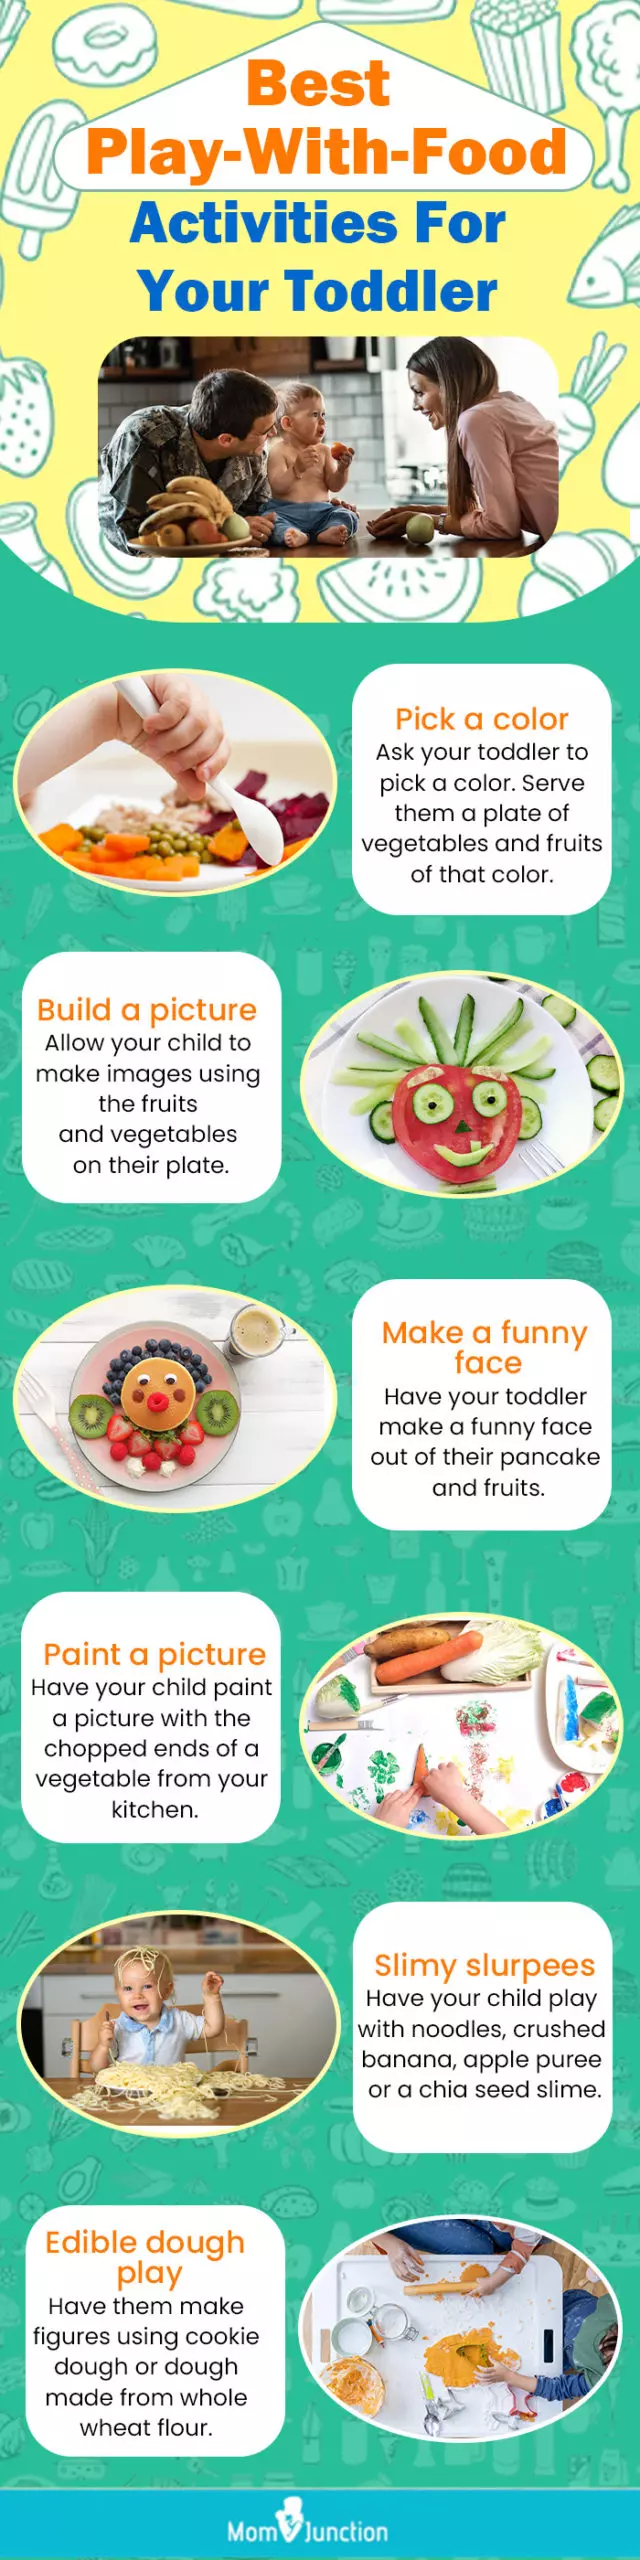 best play with food activities for your toddler (infographic)